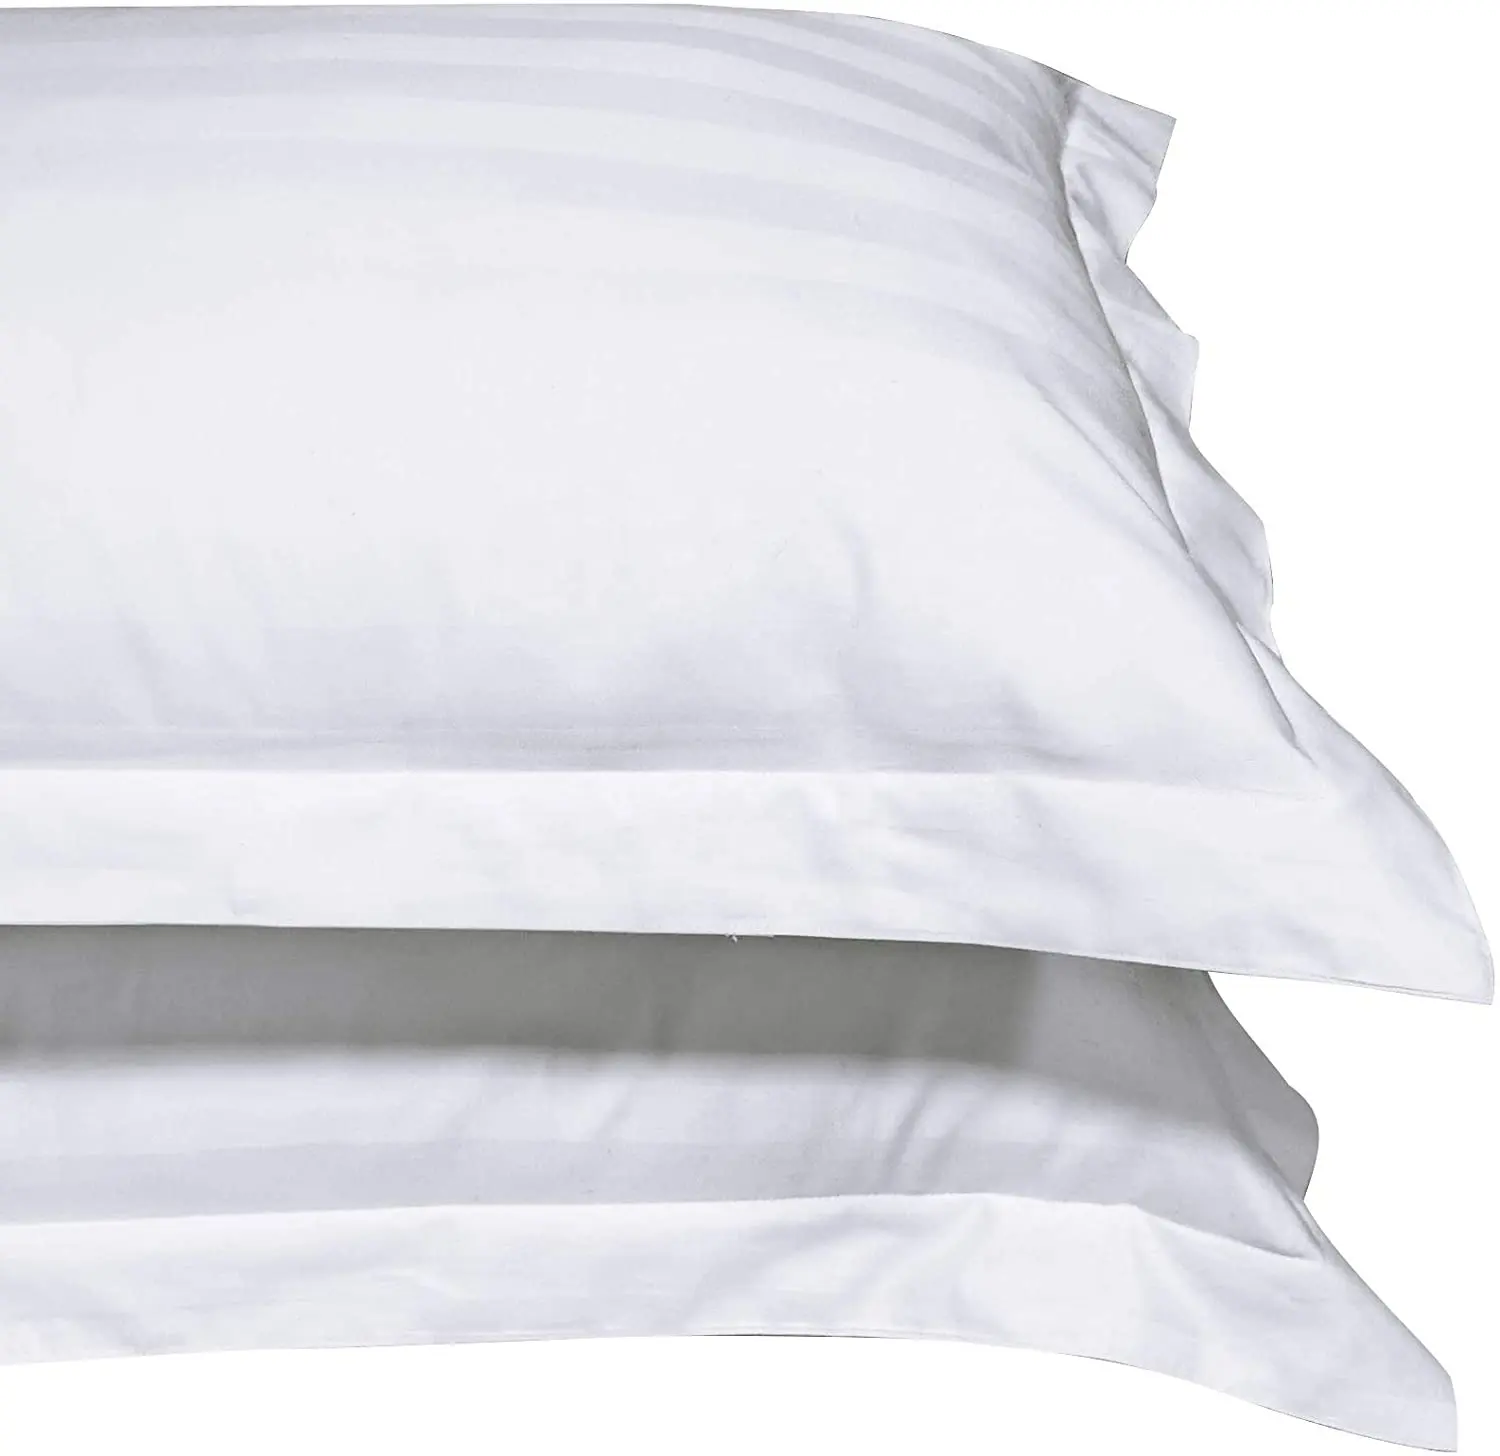 Luxury Super Soft Customized Sateen Weave 200T 300T Cotton Pillow Cases